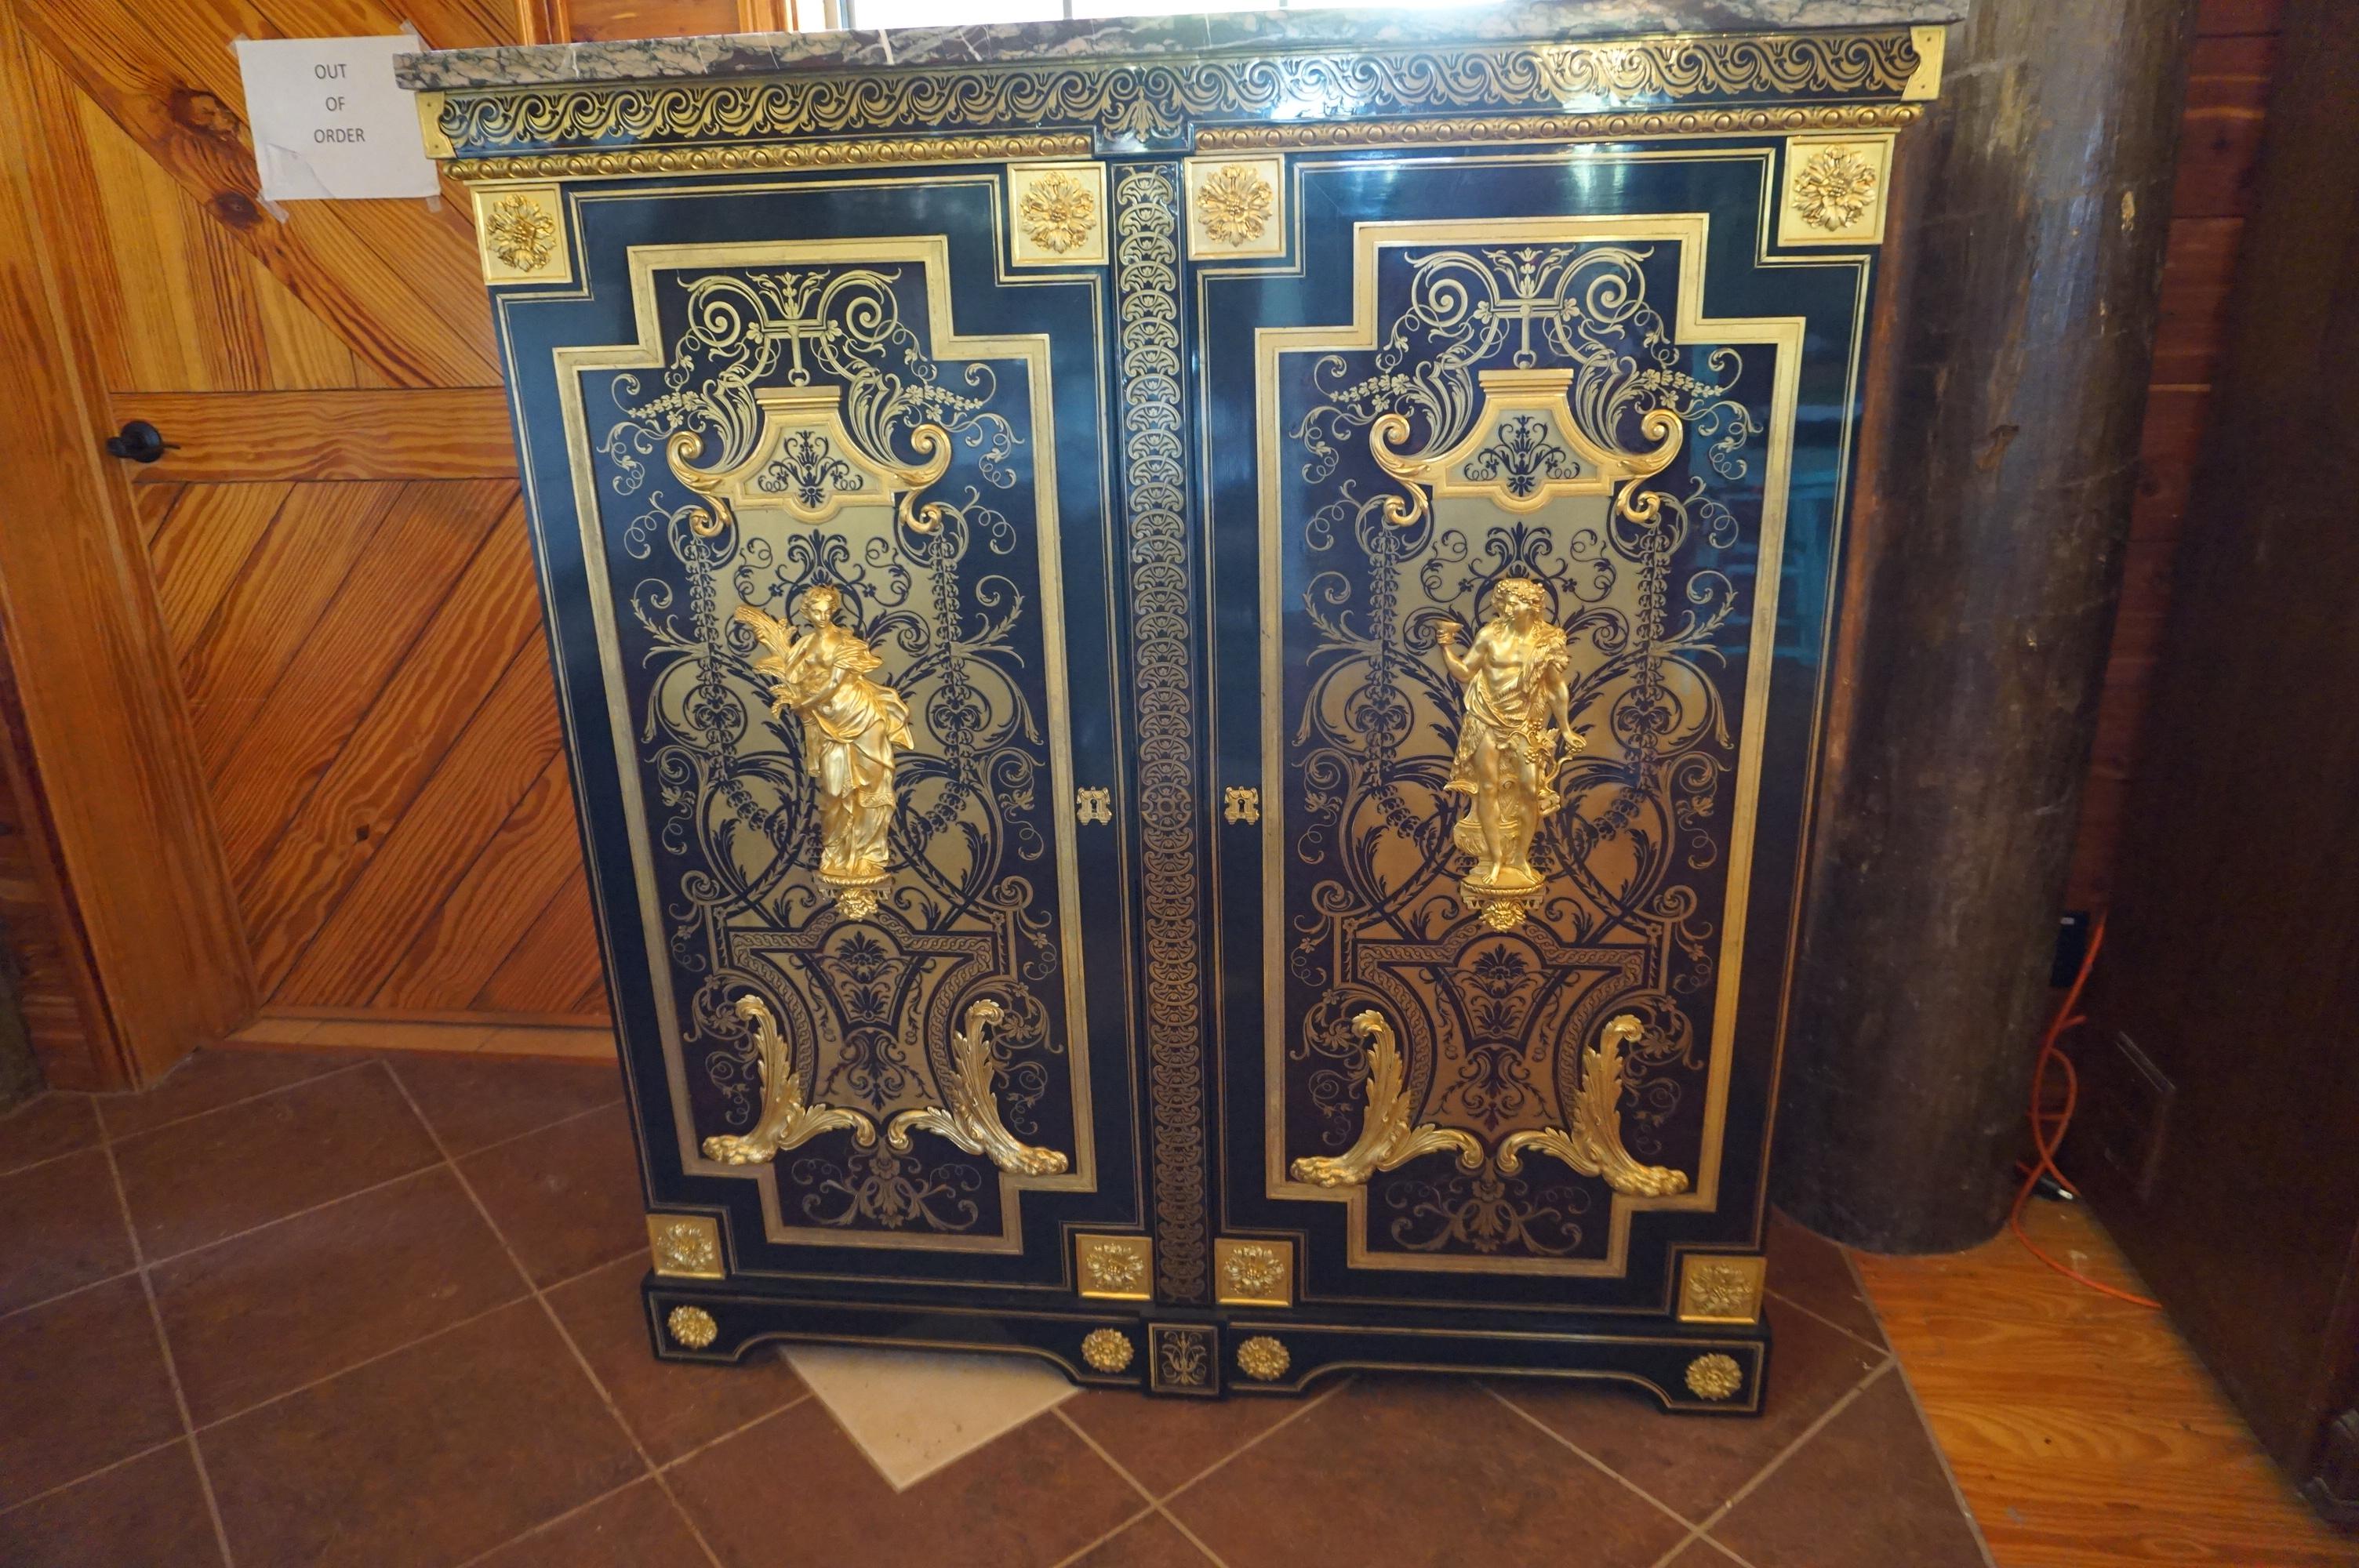 Matched PAIR of French Napoleon III ca 1860-1870 Ebonized Wood and Ormolu Mounted Gilt Cabinets!!